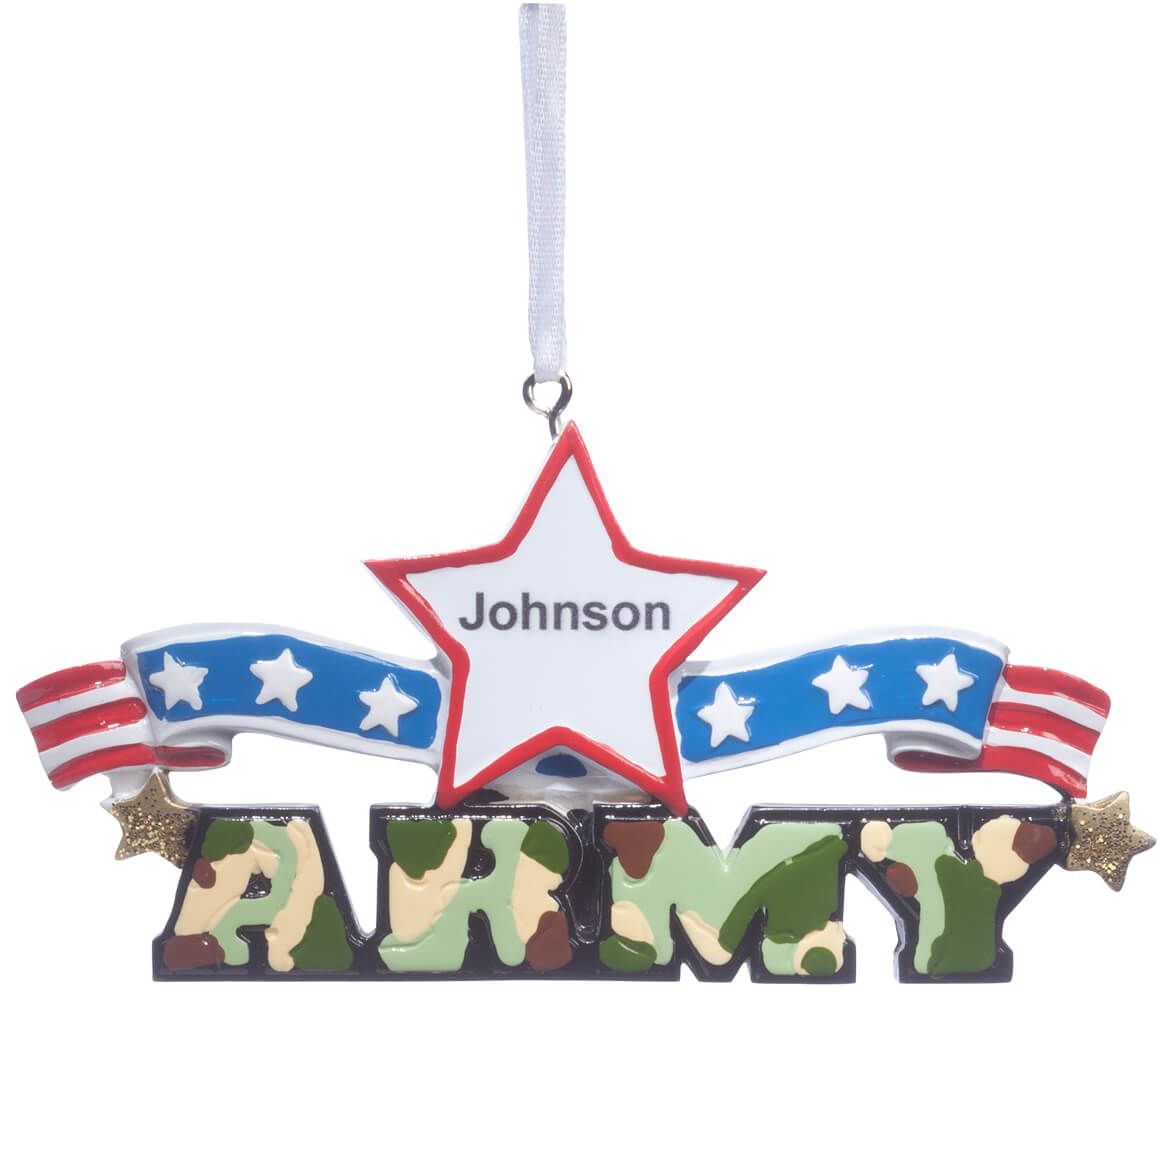 Personalized Resin Military Ornament + '-' + 360376